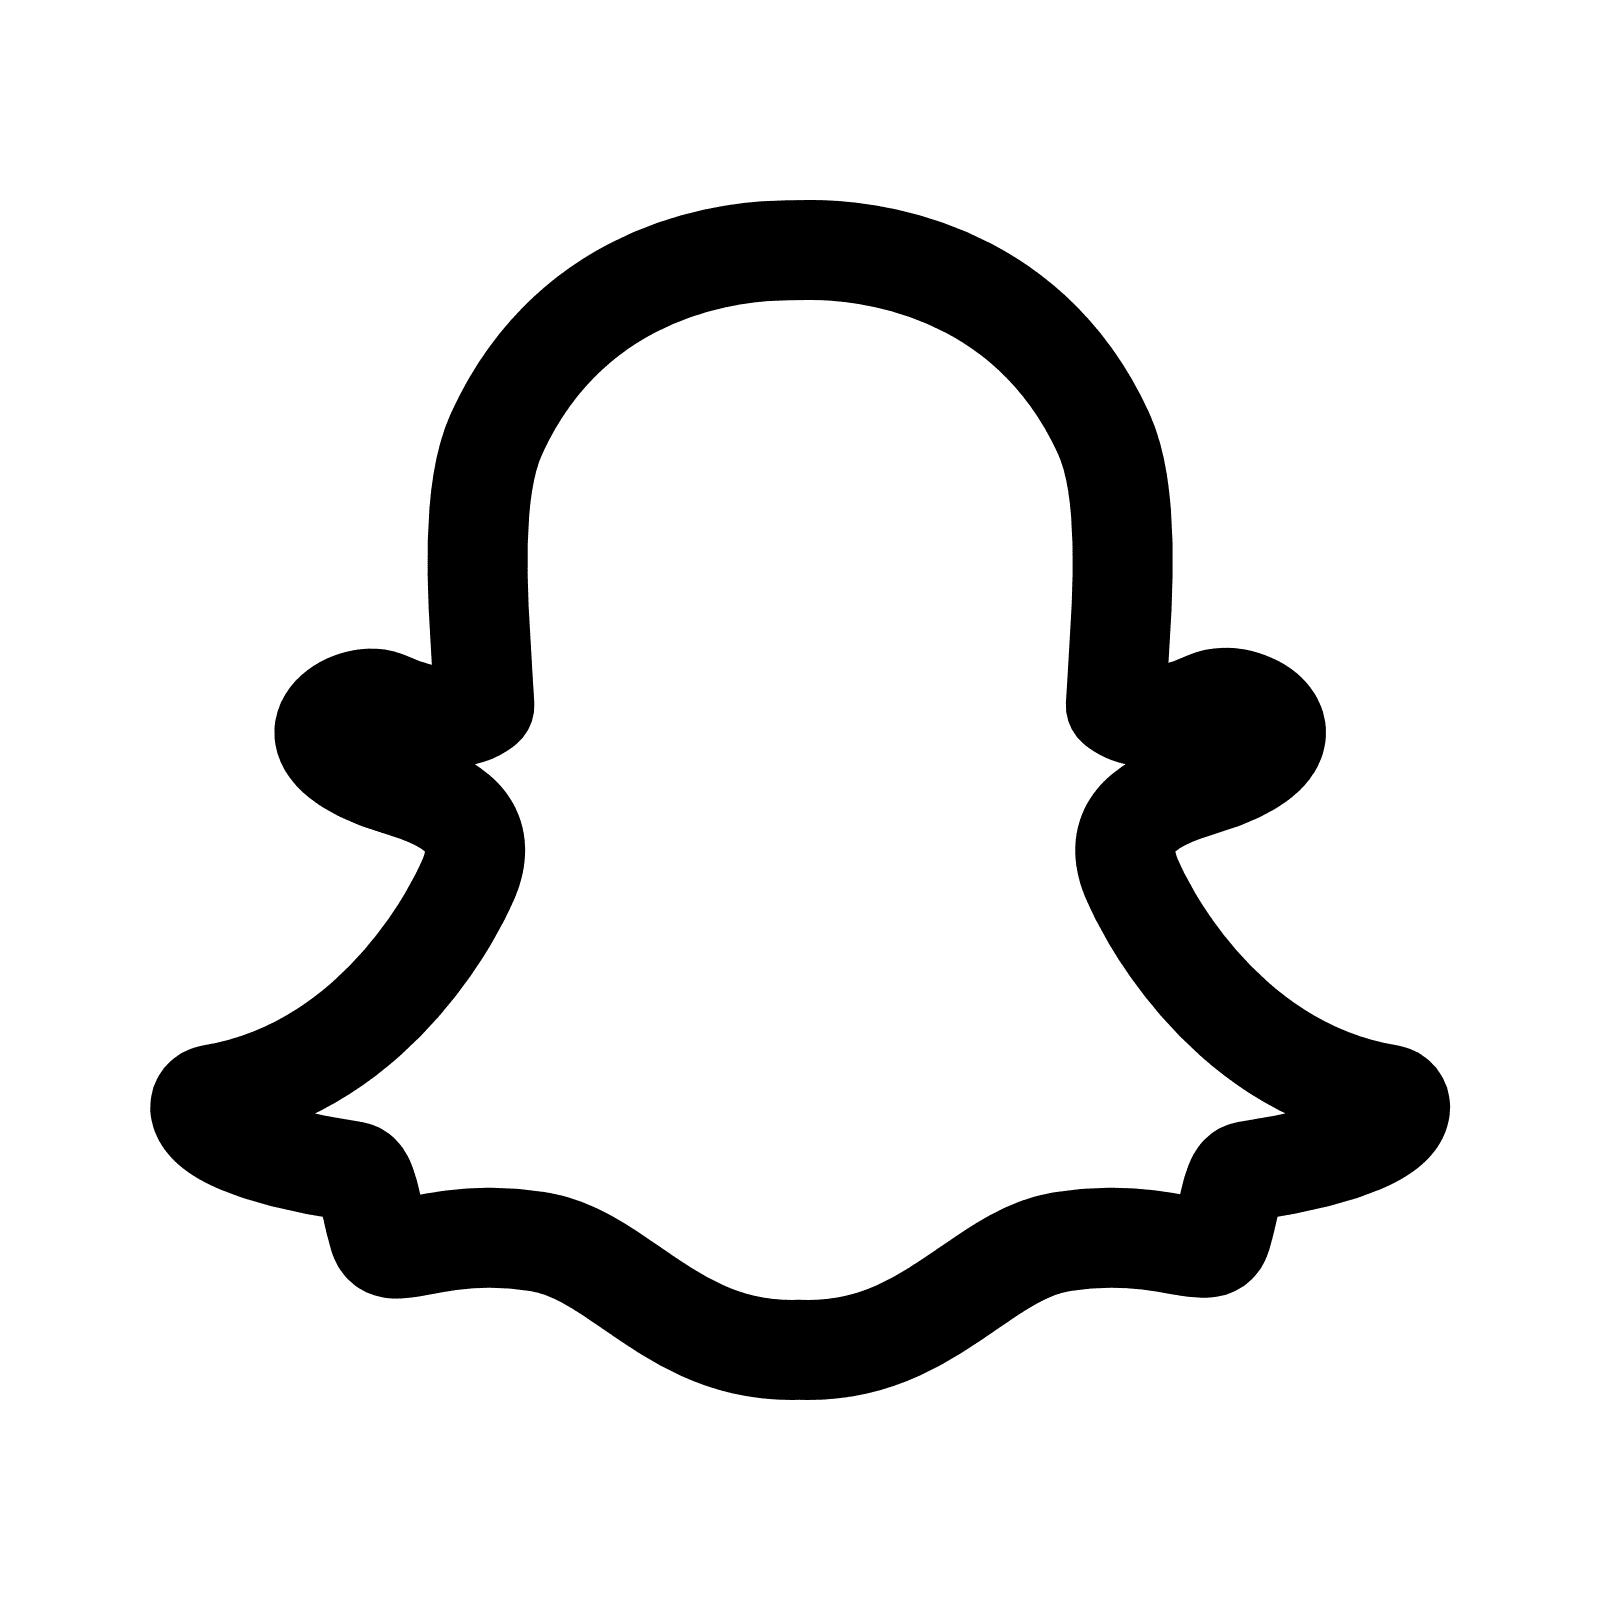 snapchat-logo-black-and-white-snapchat-rounded-icon-free-of-rounded